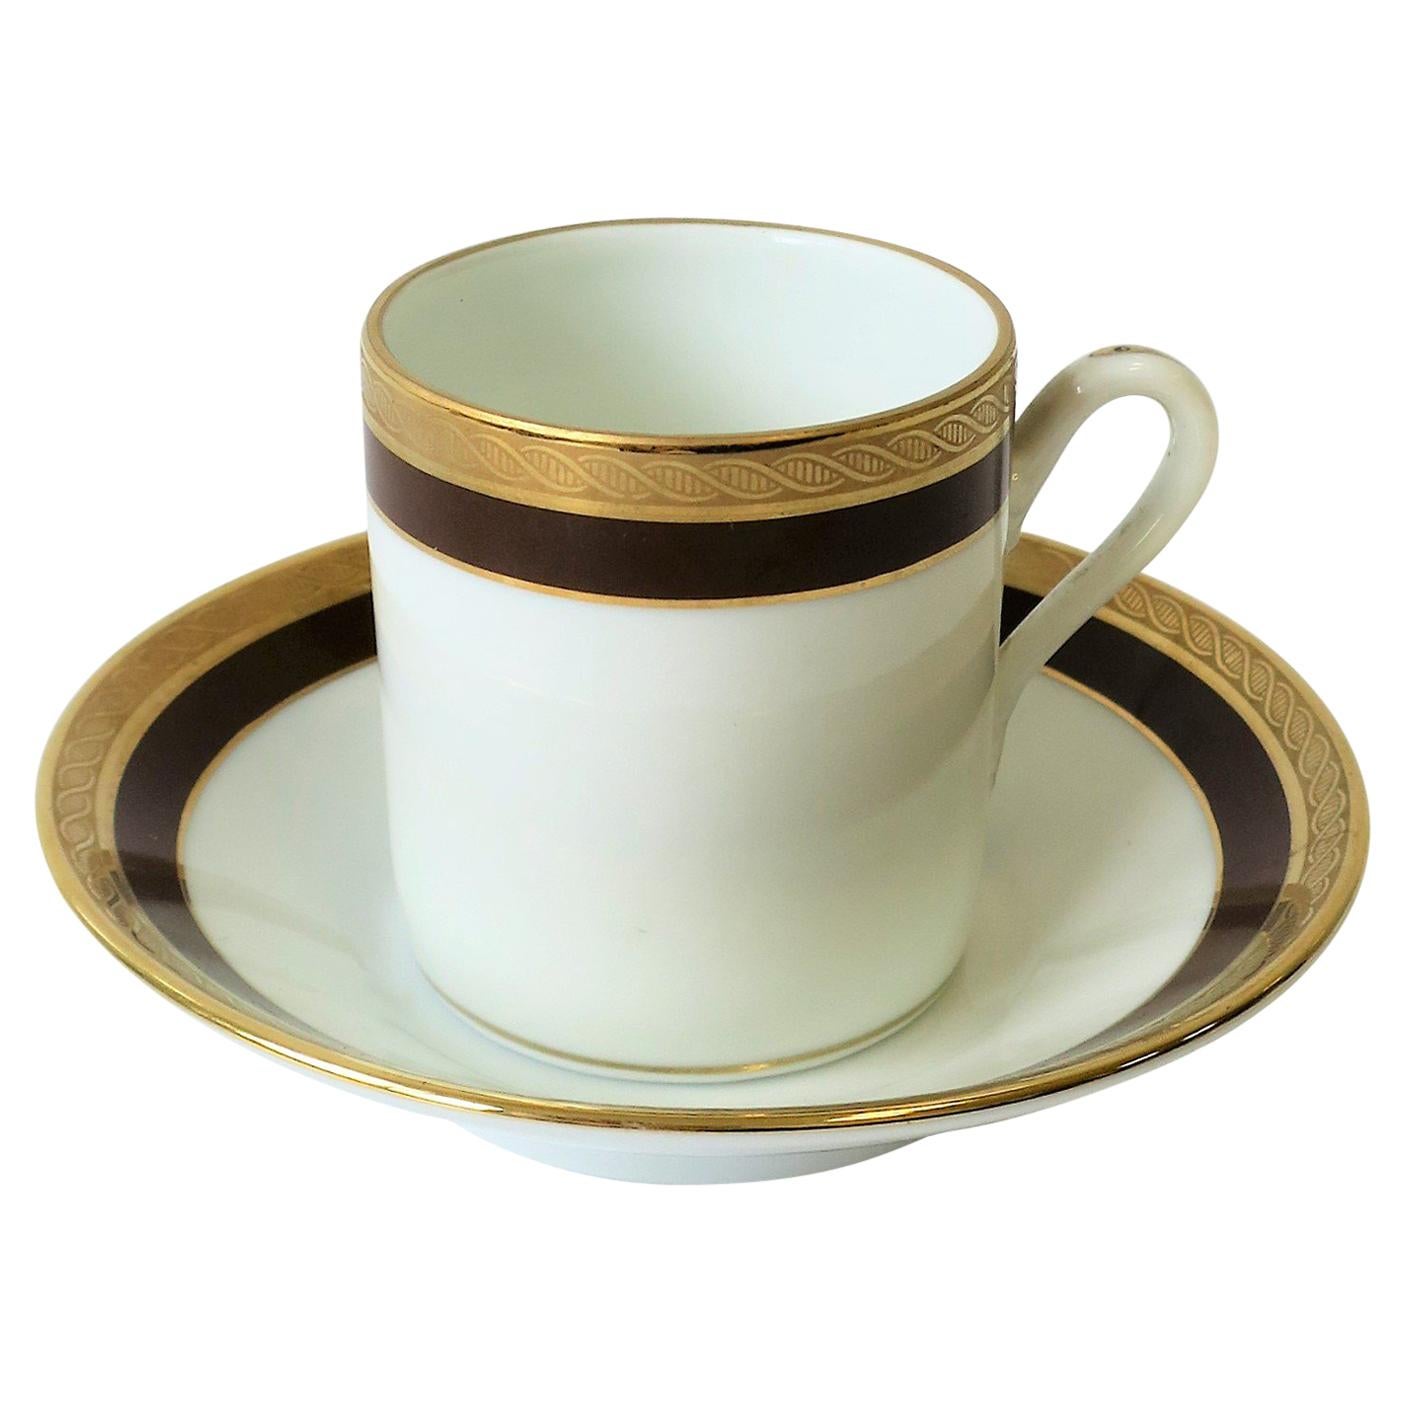 Designer White and Gold Italian Espresso Cup and Saucer by Richard Ginori